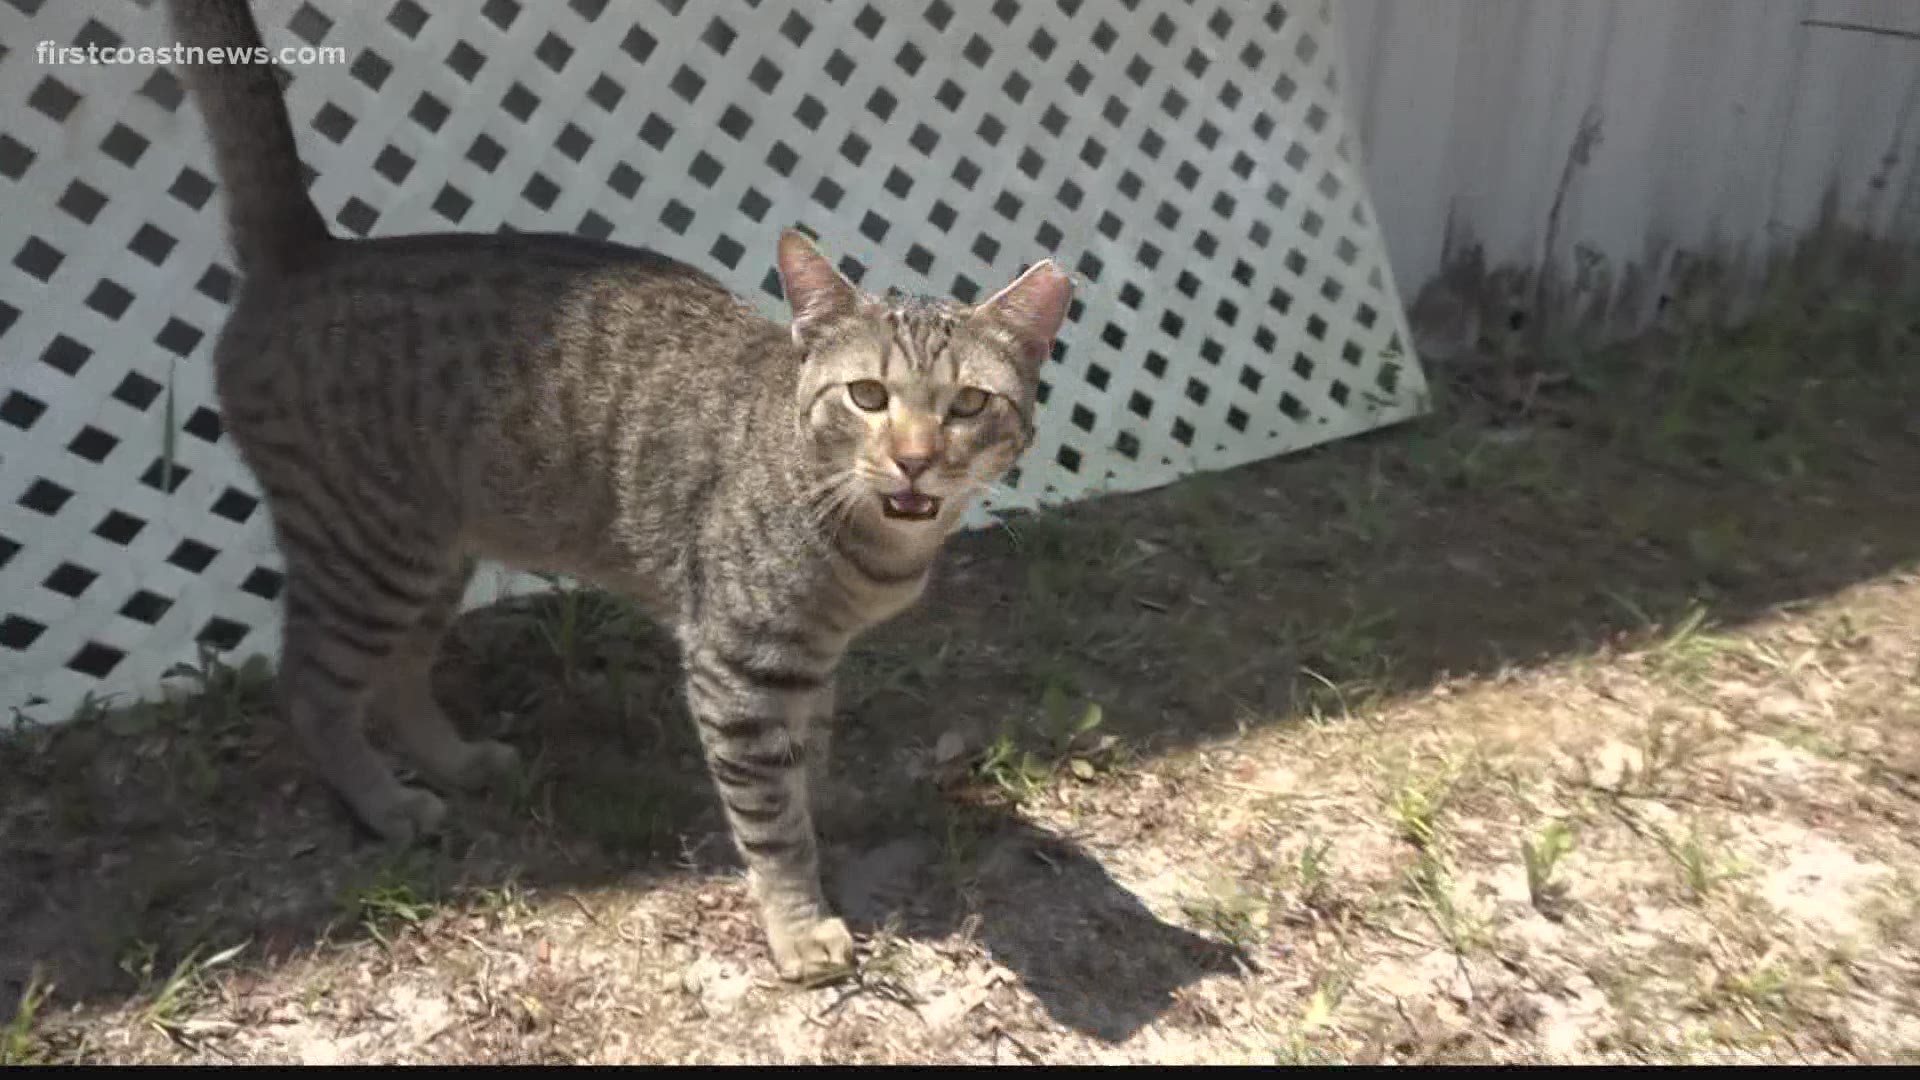 They're now asking for help trapping the cats so they can relocate them from Pomona Beach to Northeast Jacksonville, where a rescue volunteer will care for them.